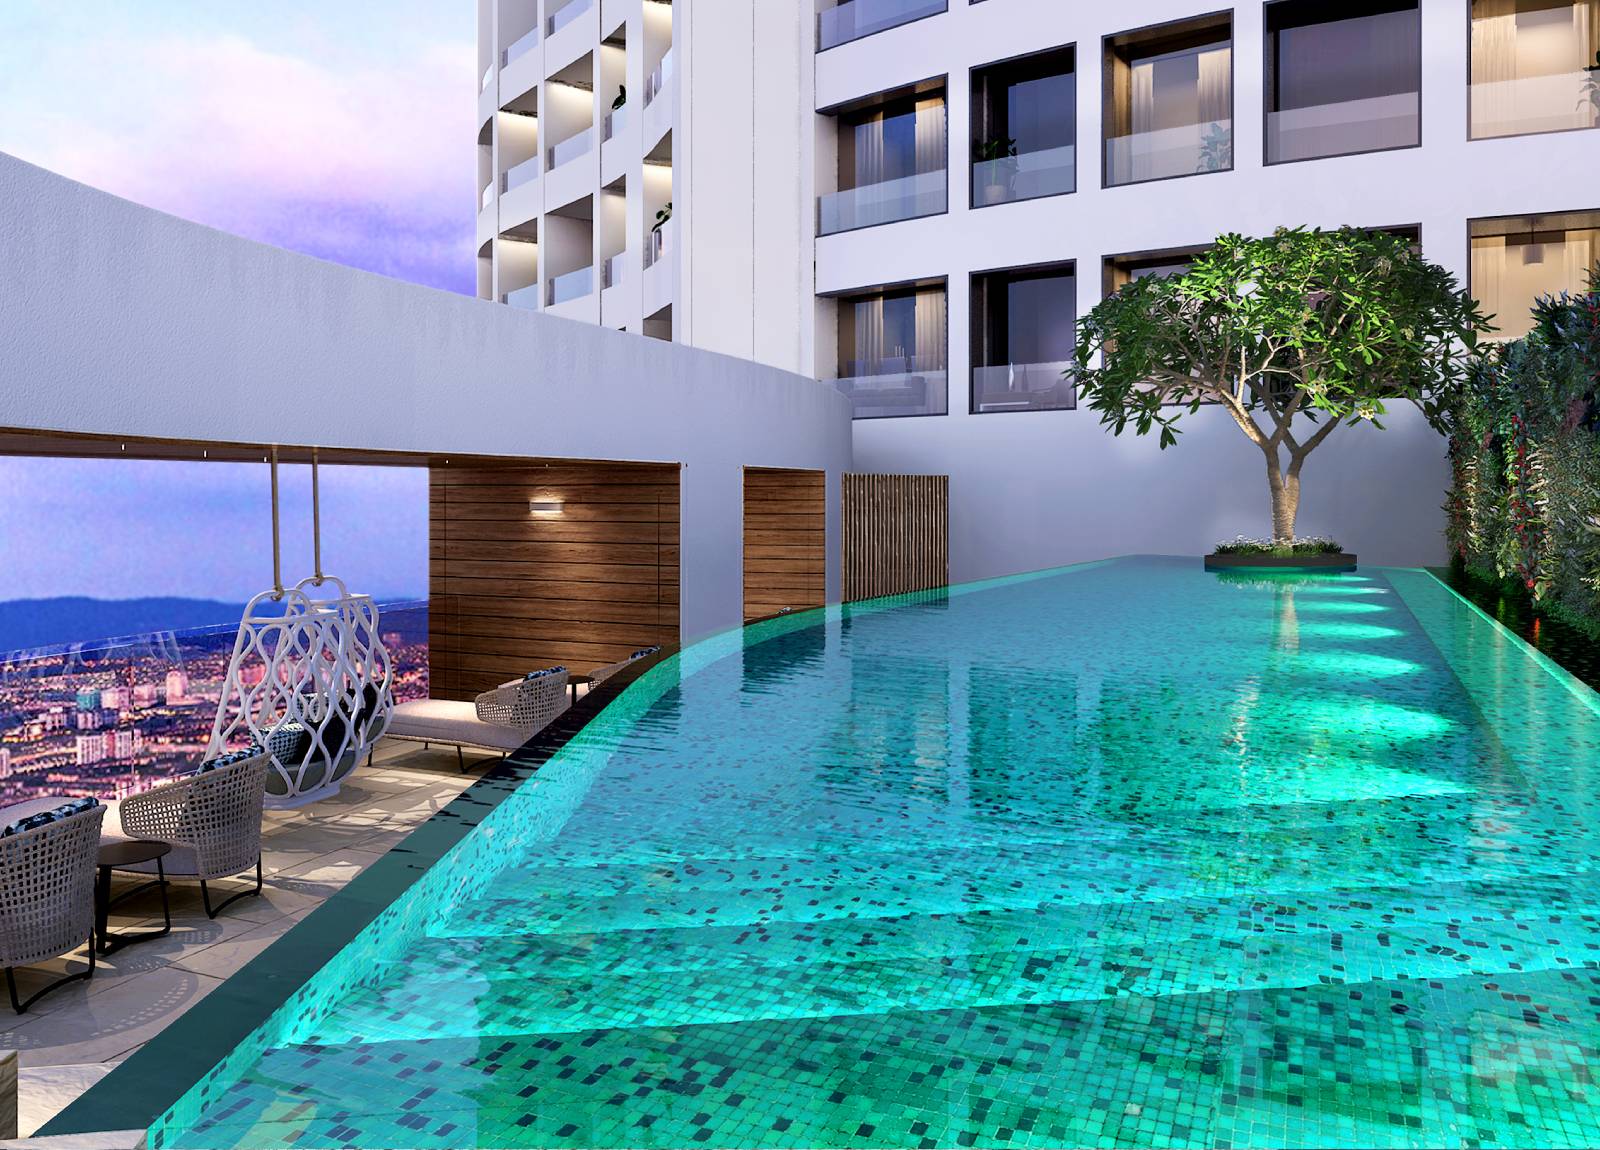 A private pool on the 43rd floor reserved for Club Saint Amand members only.